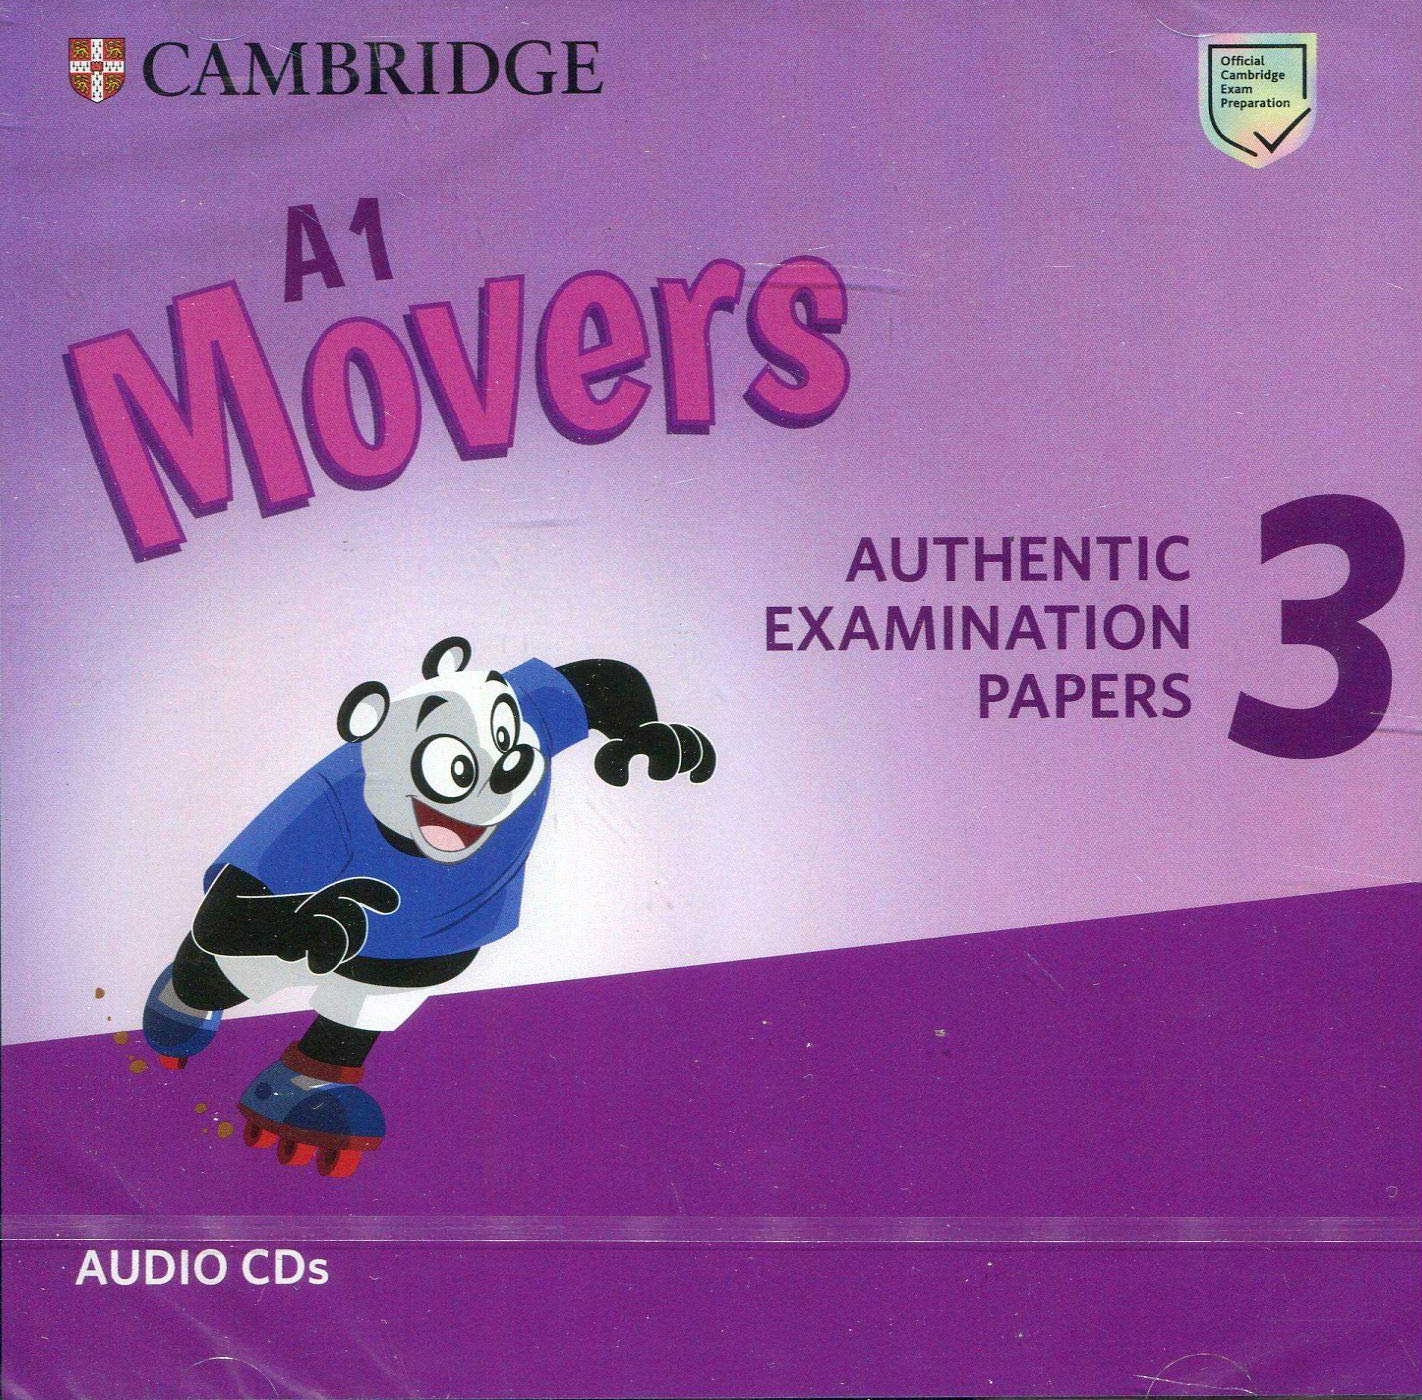 A1 Movers 3: Authentic Examination Papers - Audio CDs |